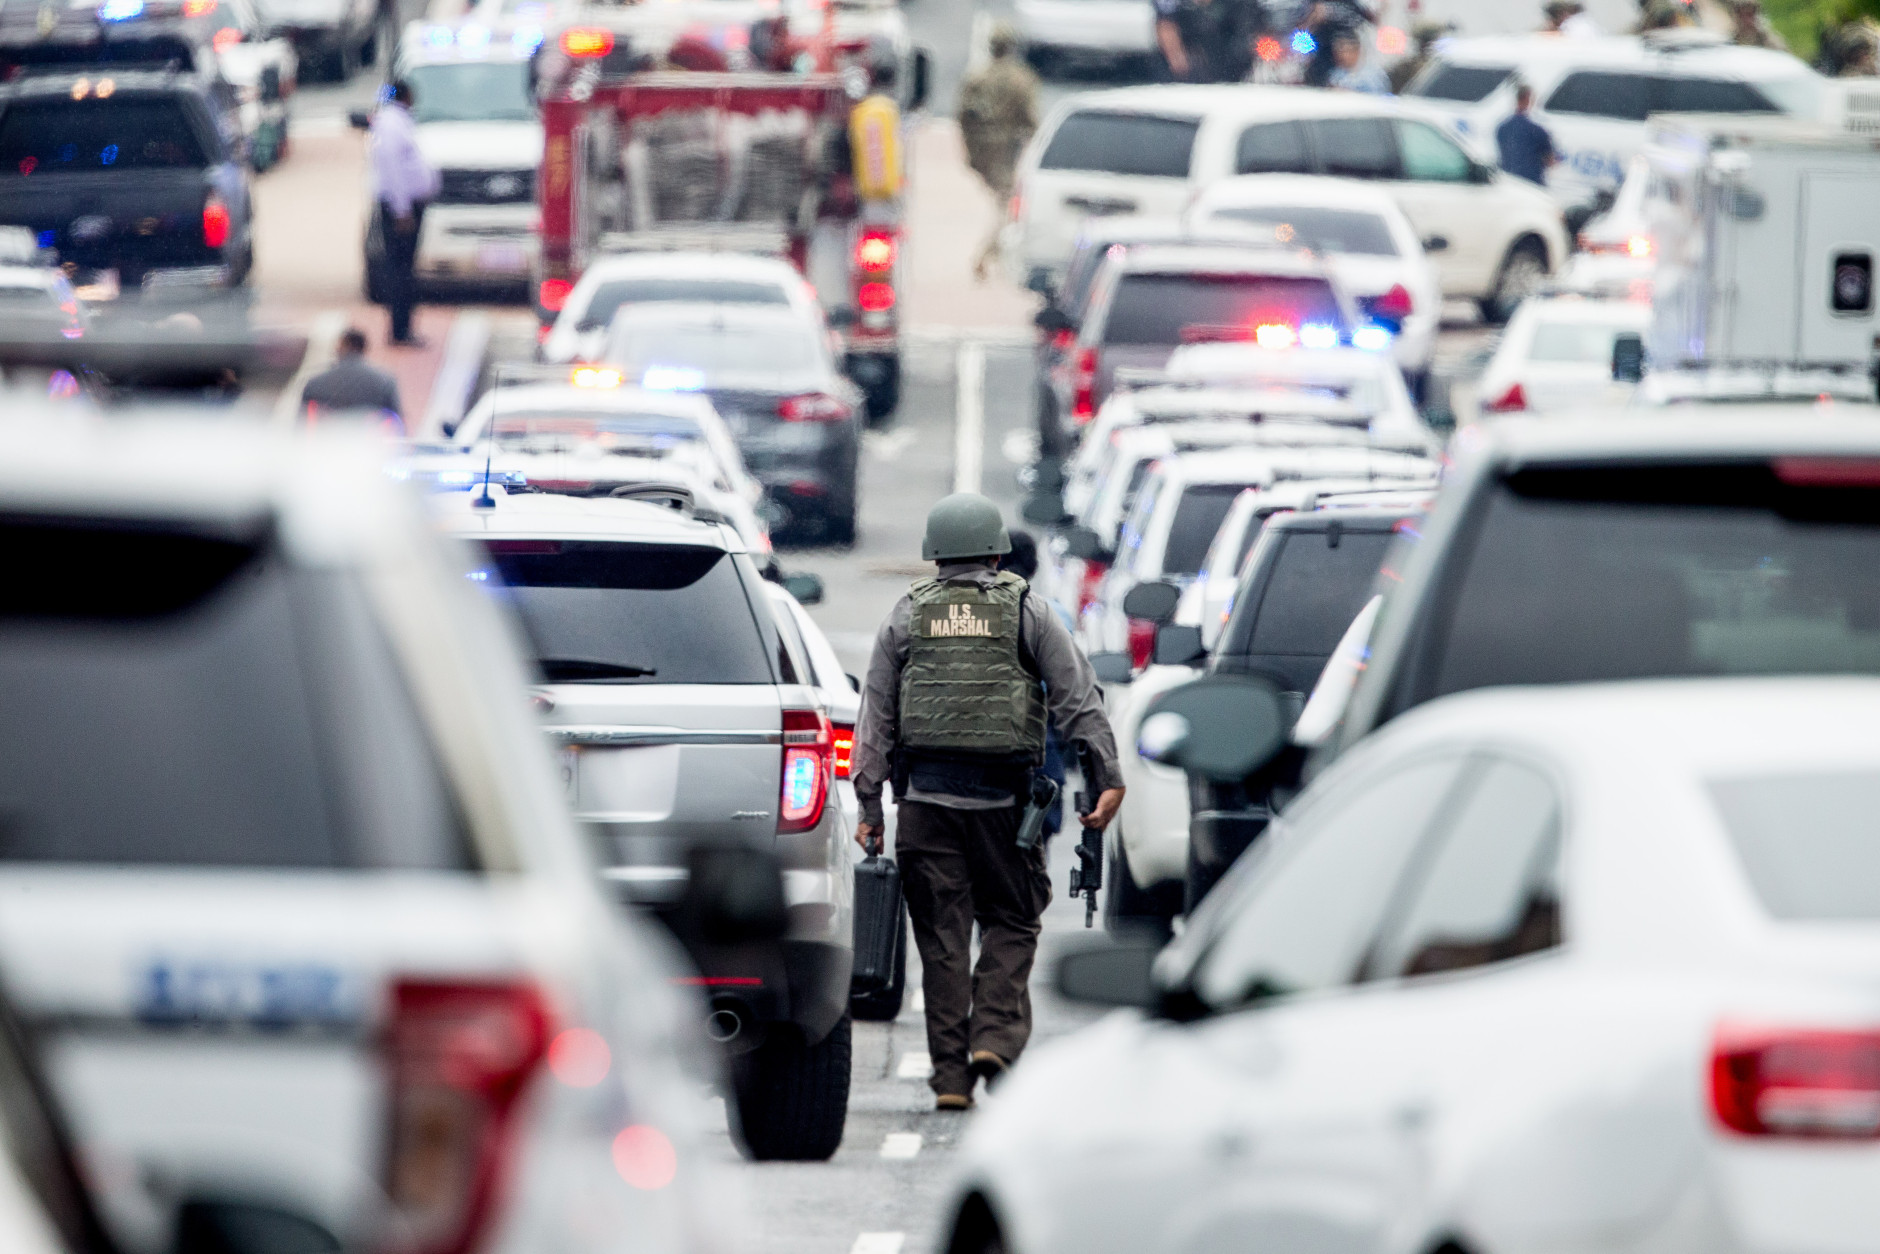 A large police presence gathers along M St. in Southeast Washington, Thursday, July 2, 2015, after an official said shots have been reported in a building on the Washington Navy Yard campus.  (AP Photo/Andrew Harnik)